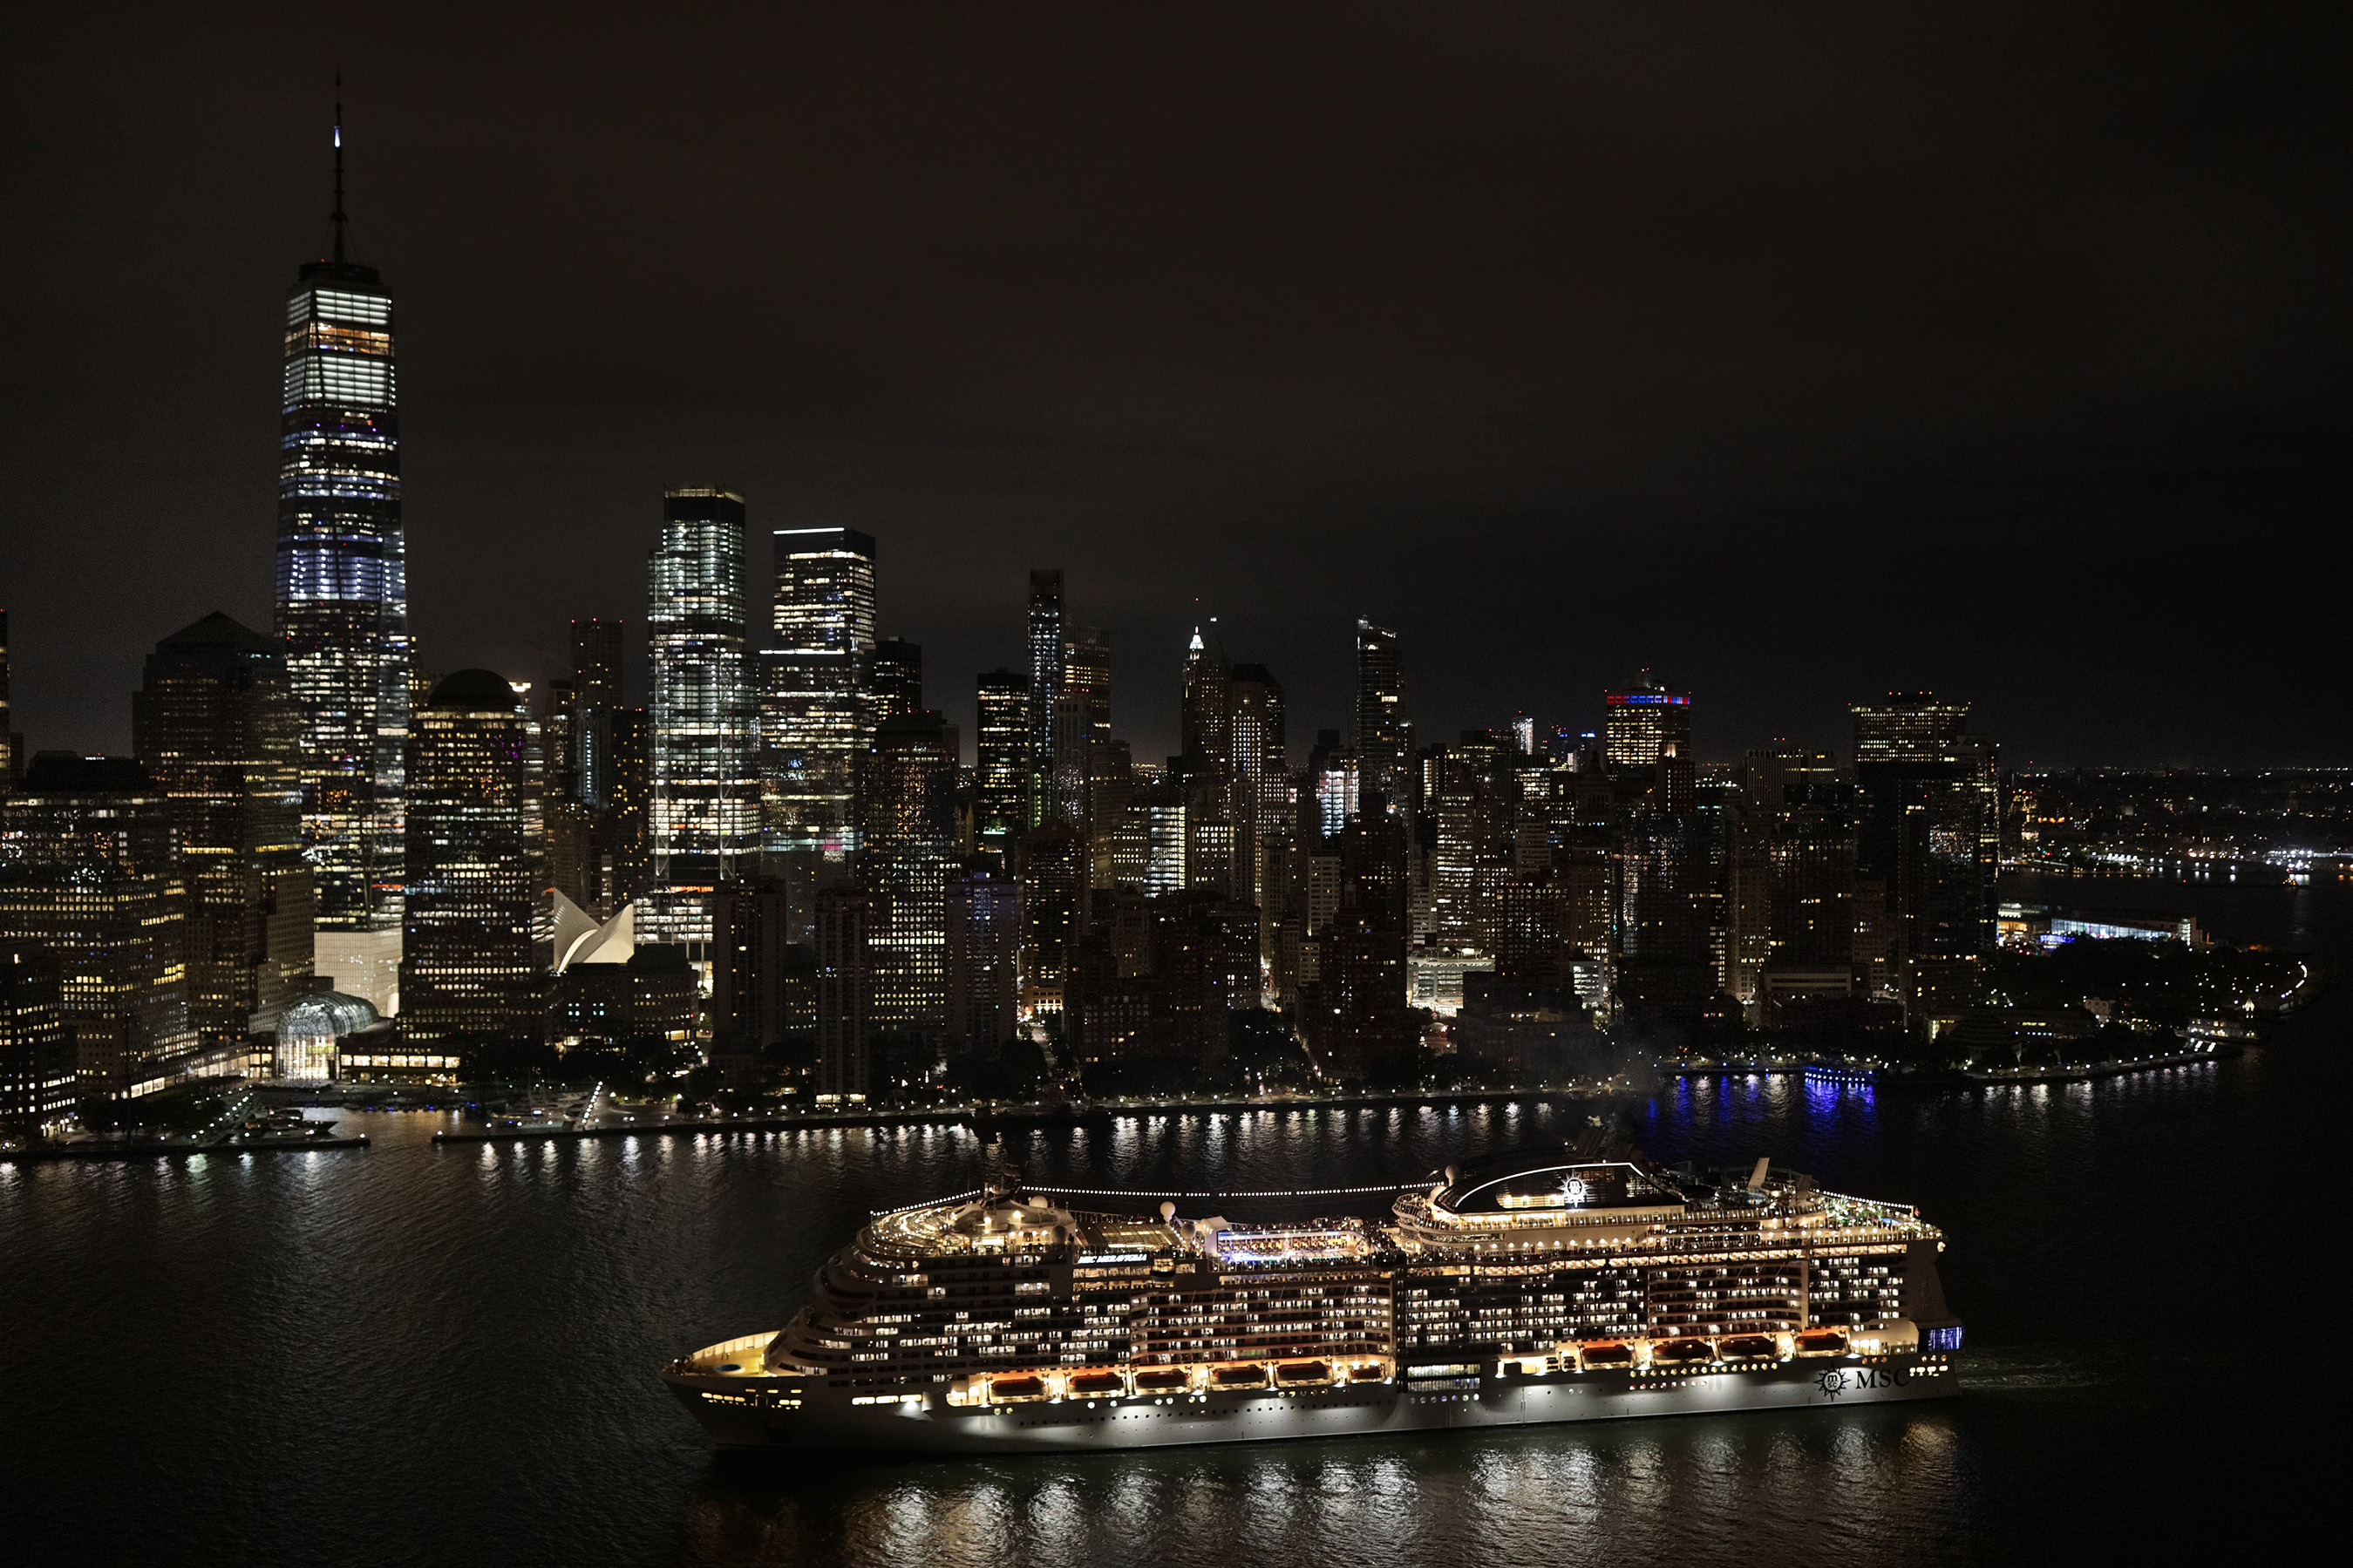 MSC Meraviglia arrives to Manhattan Cruise Terminal, cruising by the shimmering NYC skyline as she enters the city.